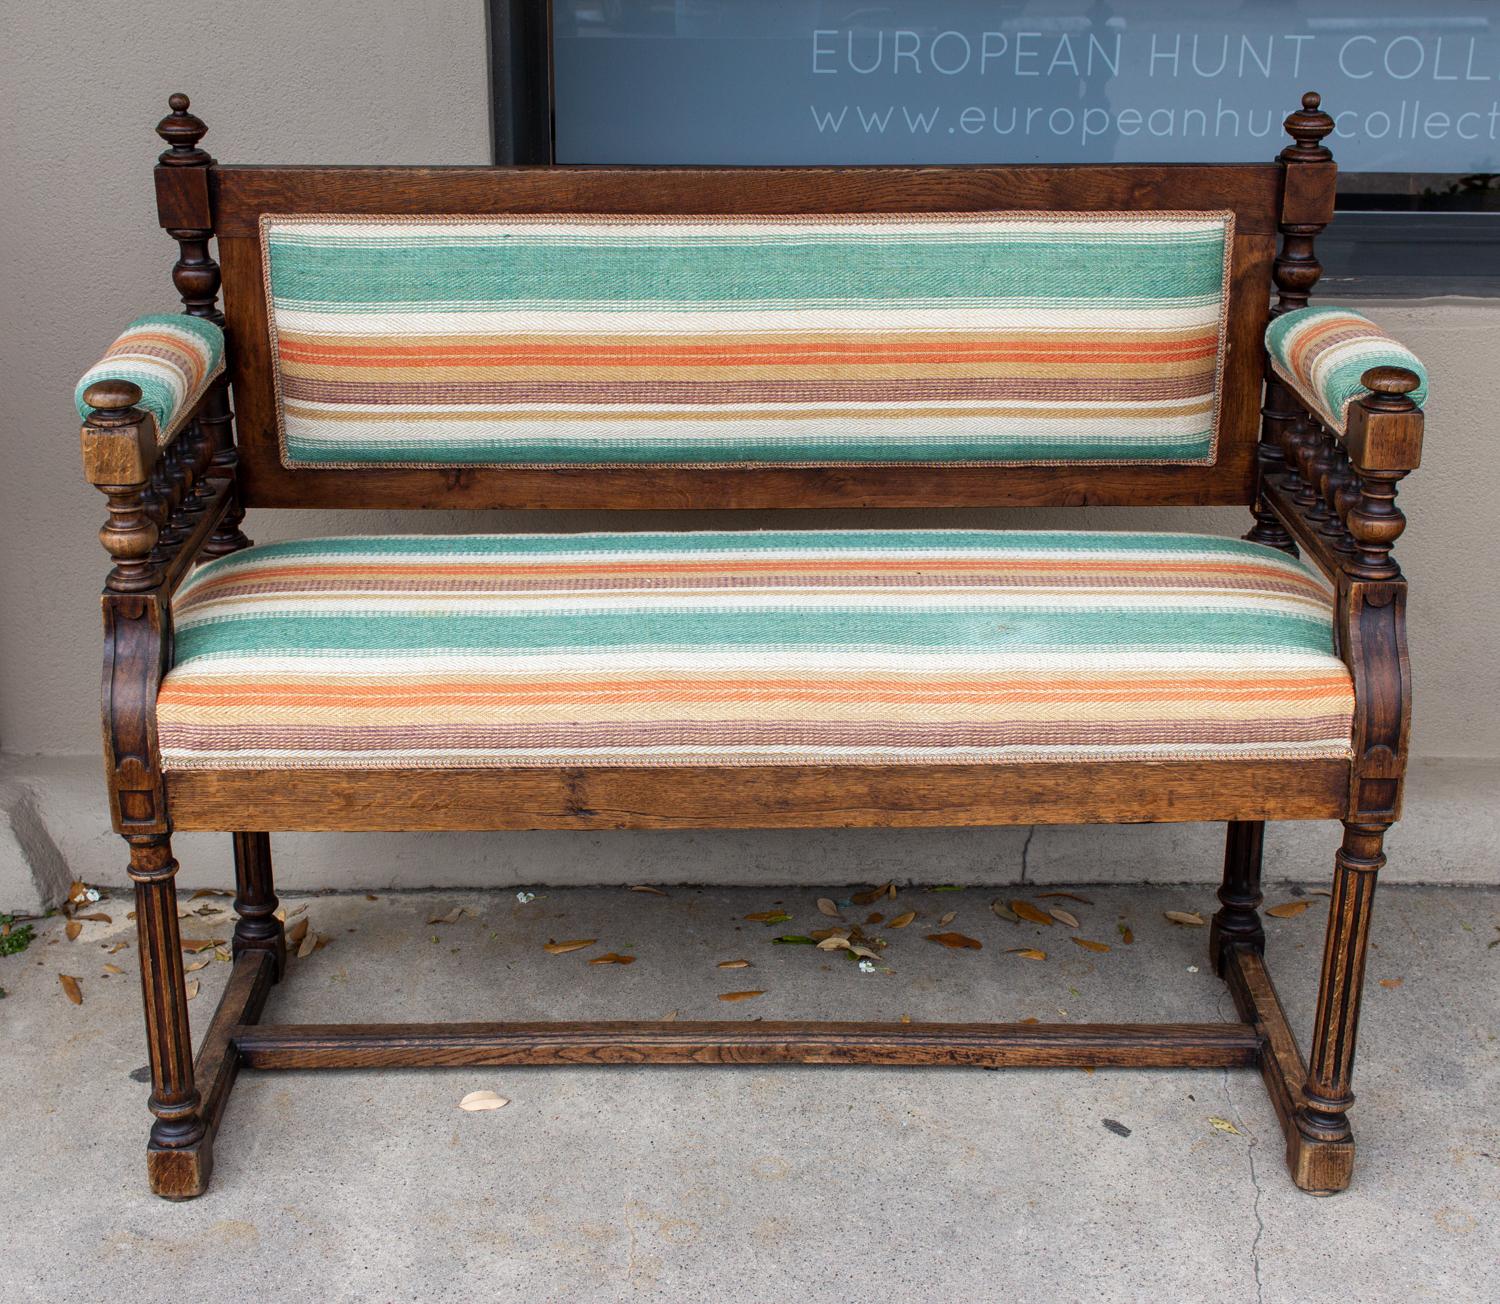 This is an antique French upholstered oak hall bench with striped fabric. The bench has turned spindle details at the arms and finial details on the corners of the back. The upholstery is a striped material in a light orange and spring green stripe